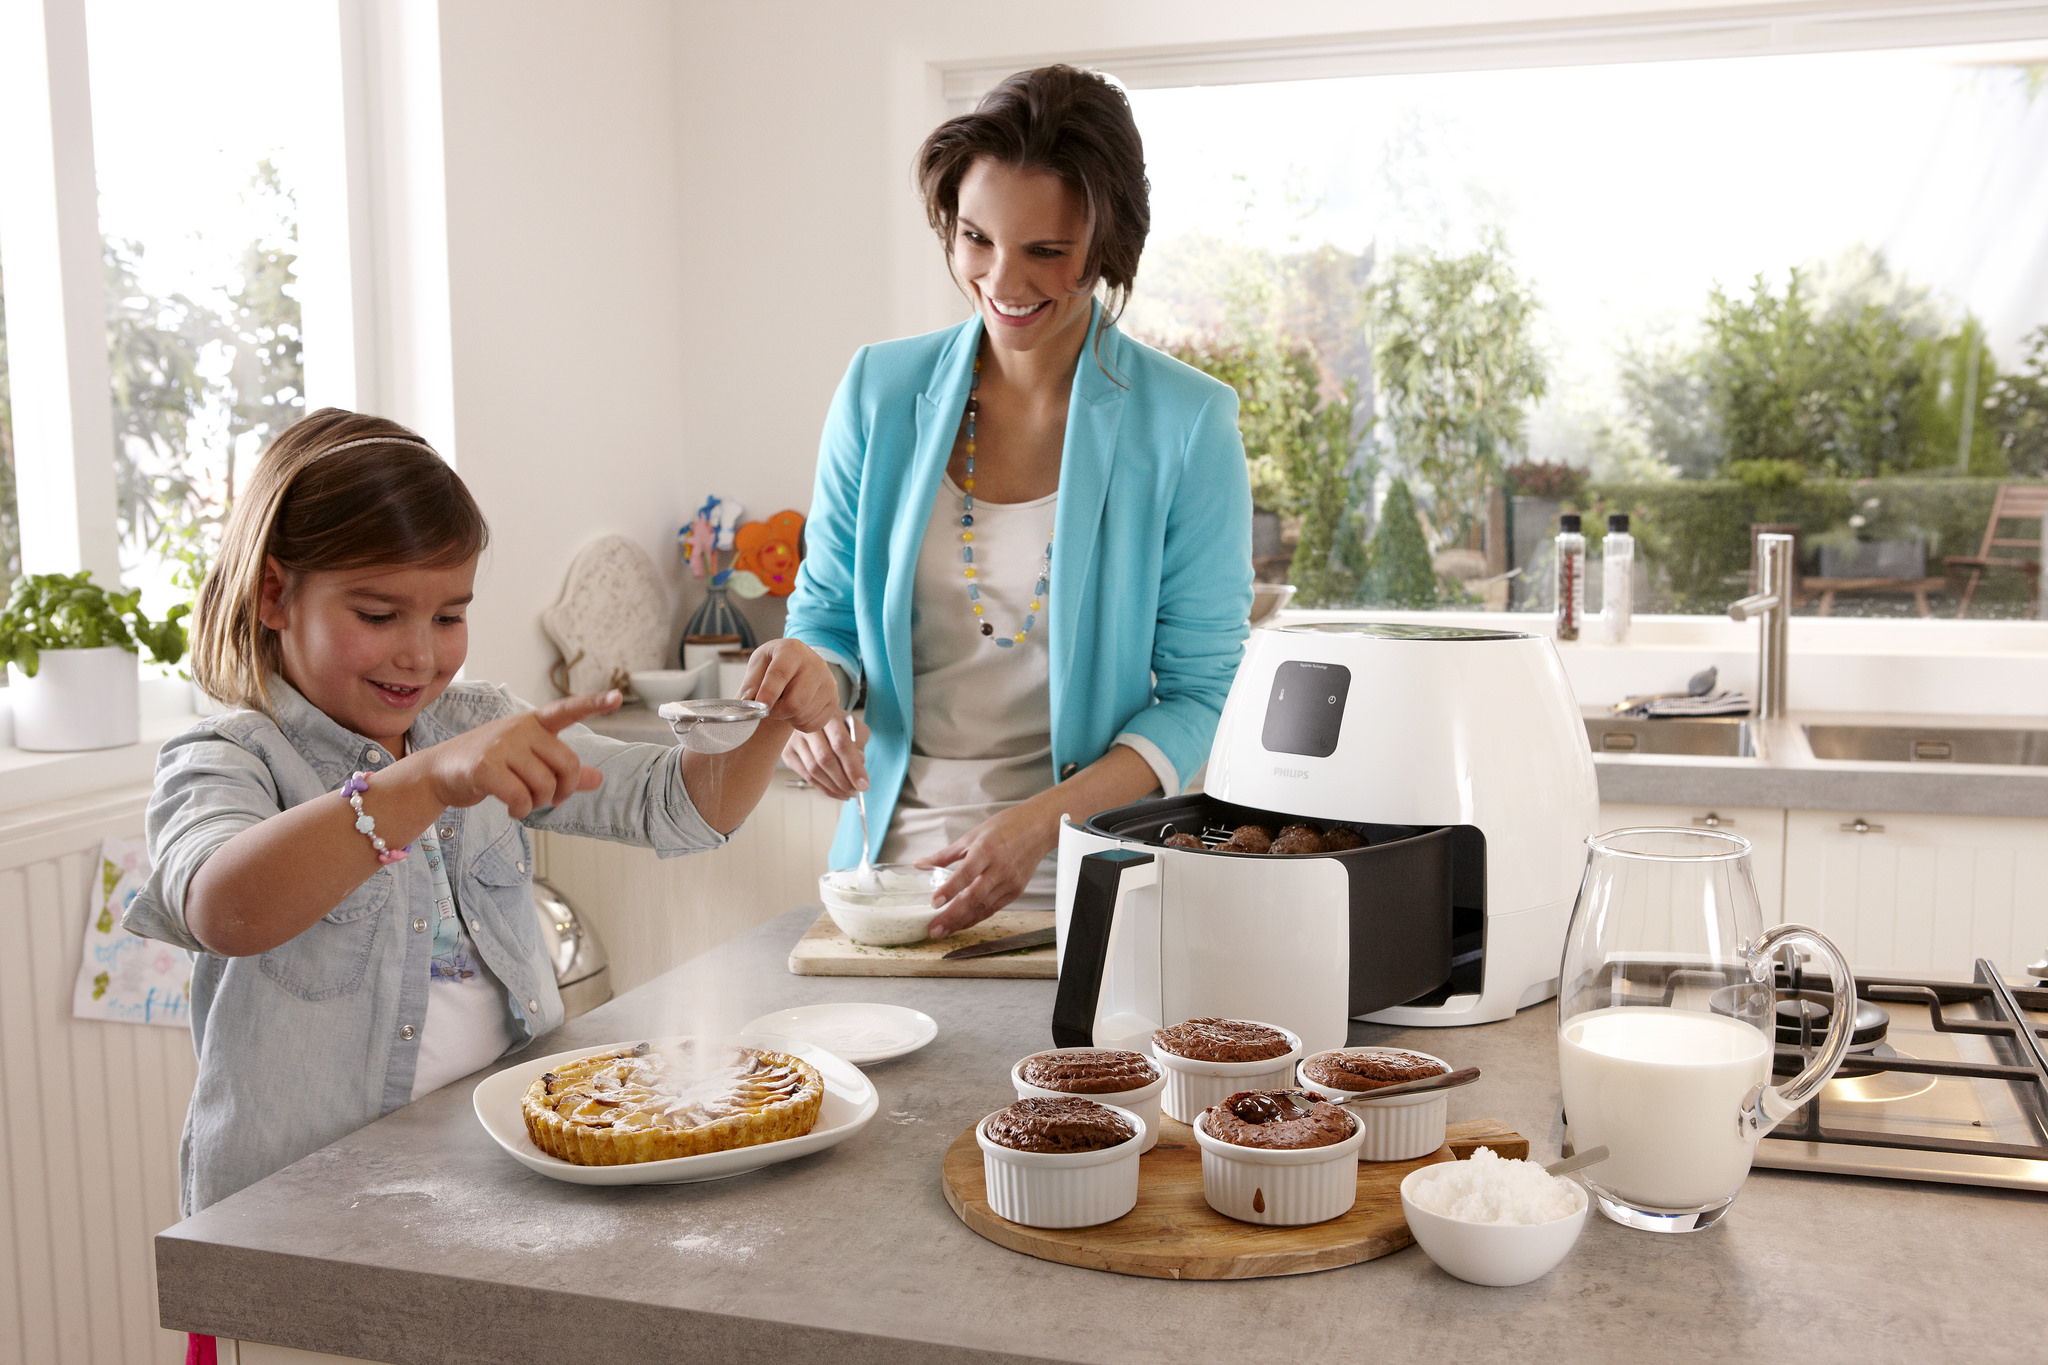 LXP - Lifexpe - philips kitchen ways to adopt healthy lifestyle secrets to develop healthy habits